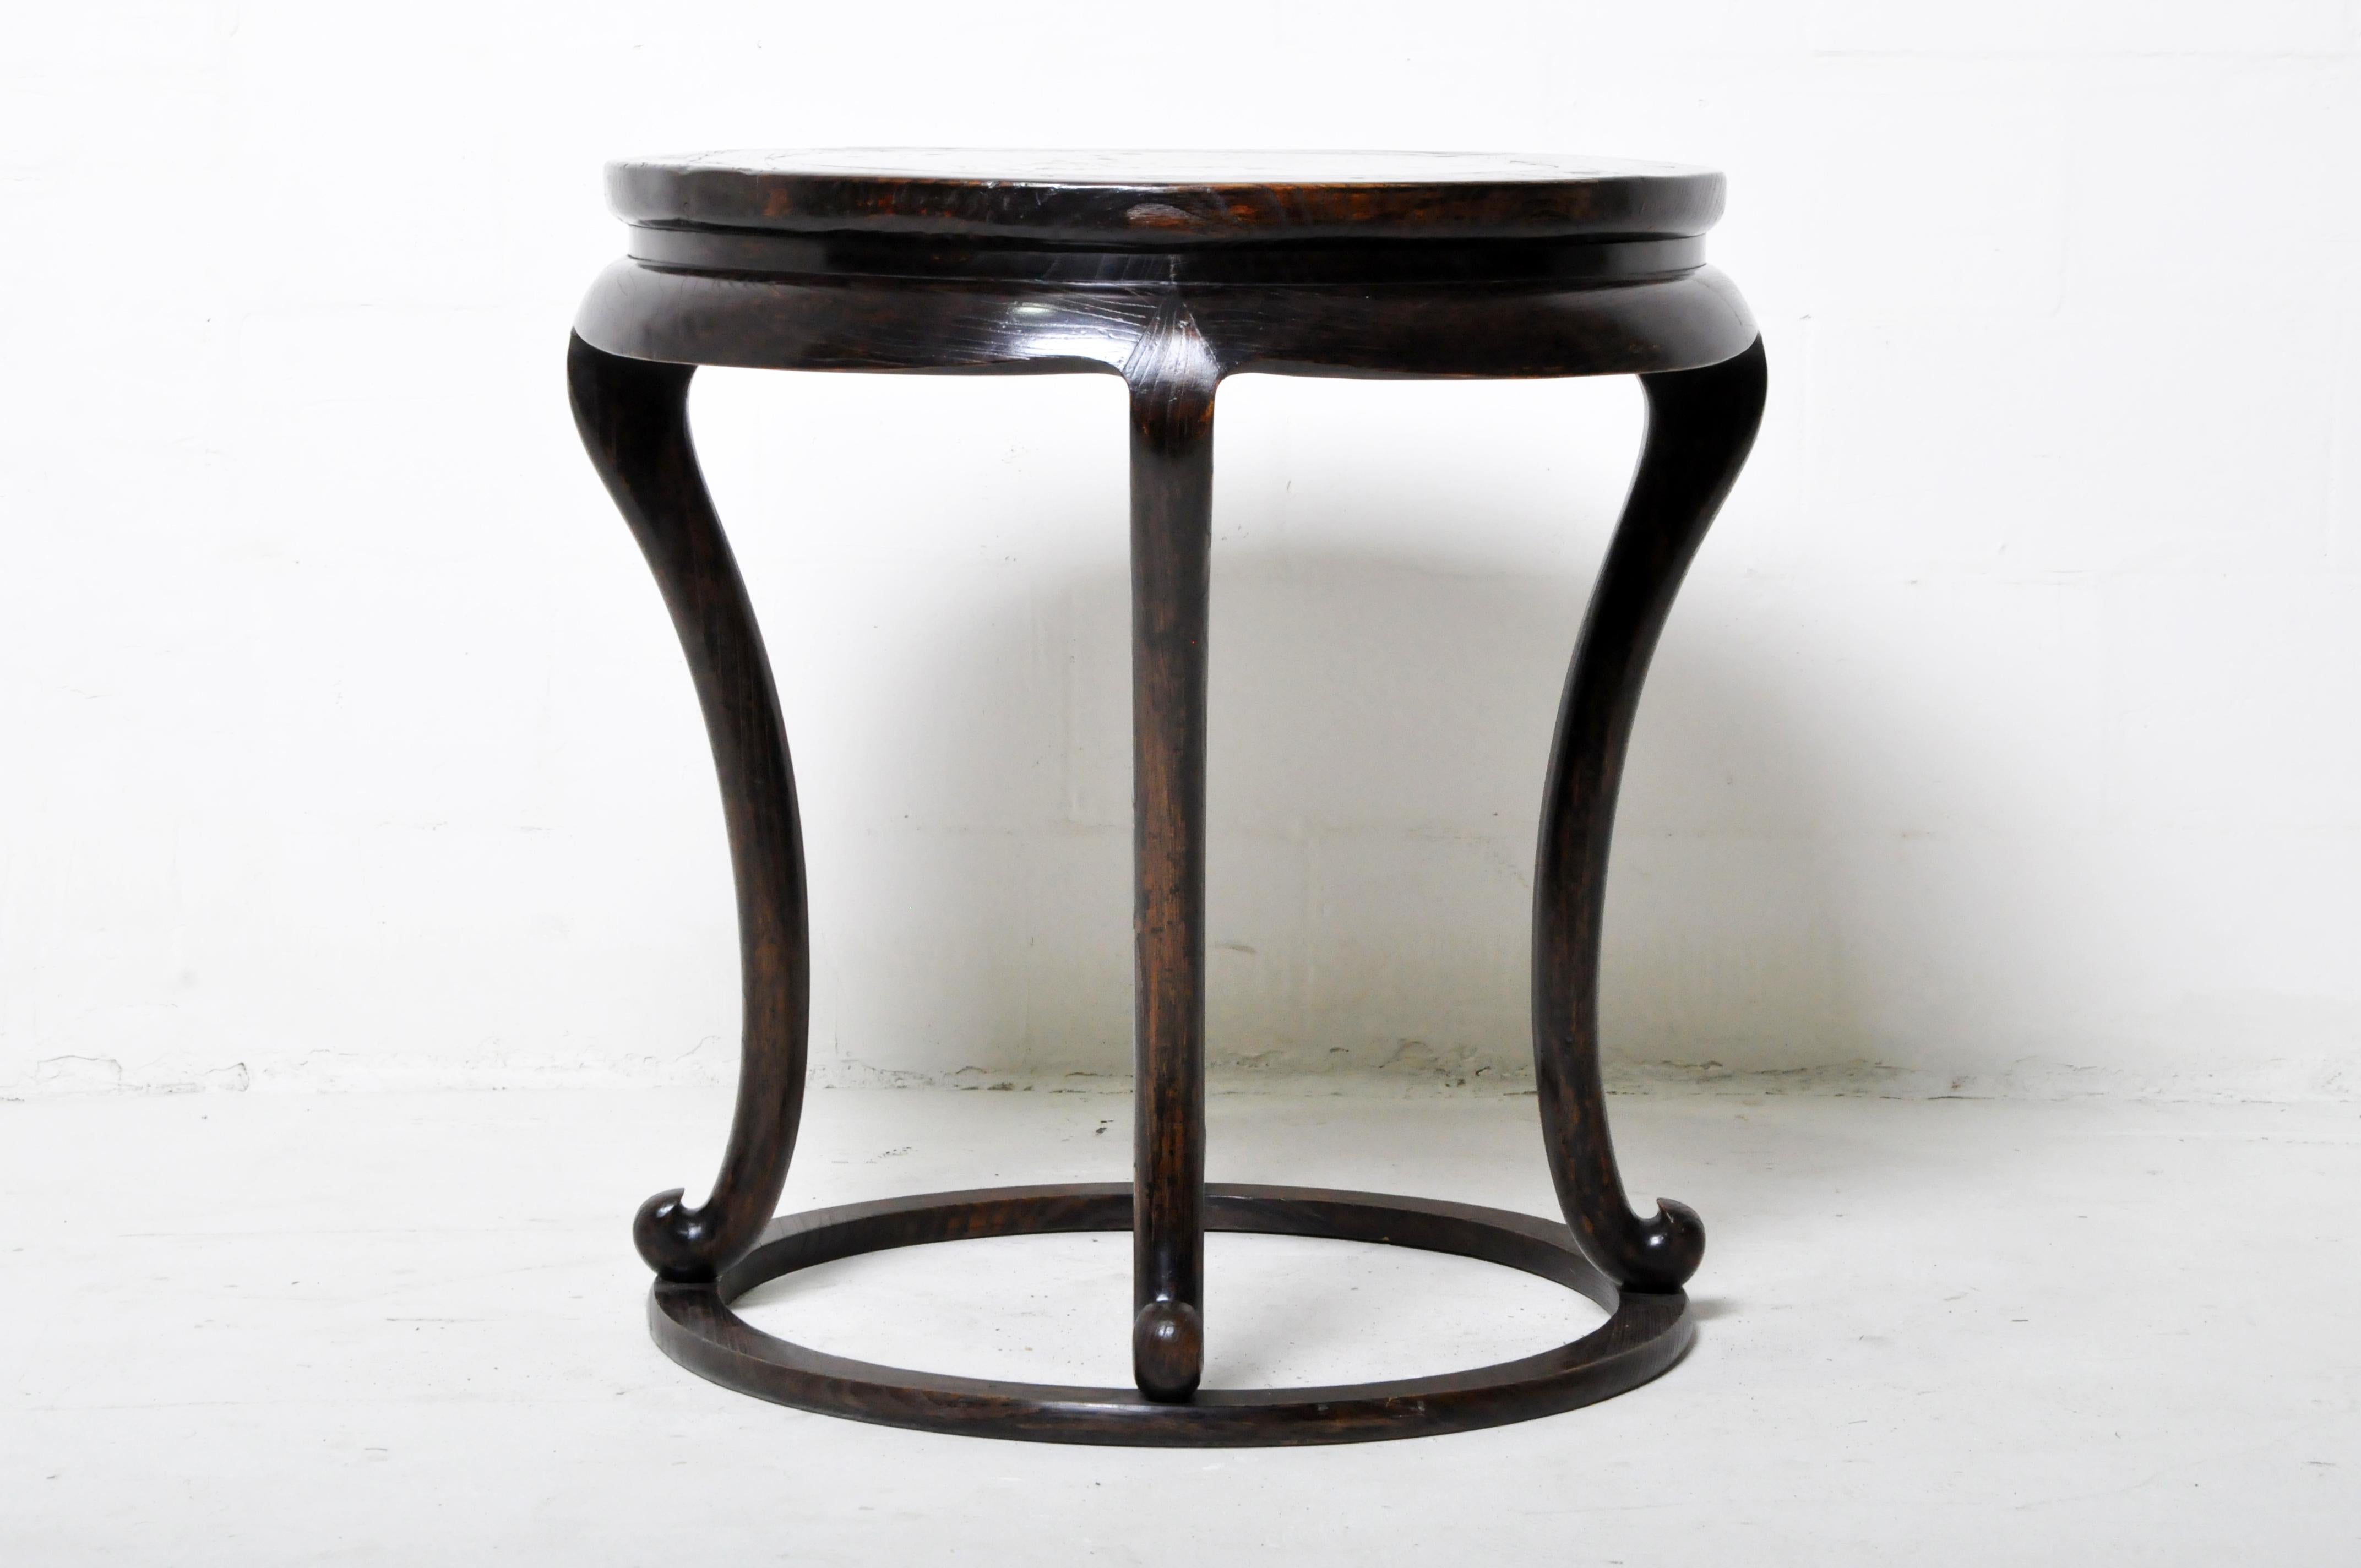 This elegant cabriole-legged table once held an incense burner in an elegant home or ancestral shrine. It is made from elmwood and protected by dark oxblood lacquer. The stone insert is green marble. It is of Northern Chinese origin and dates to the